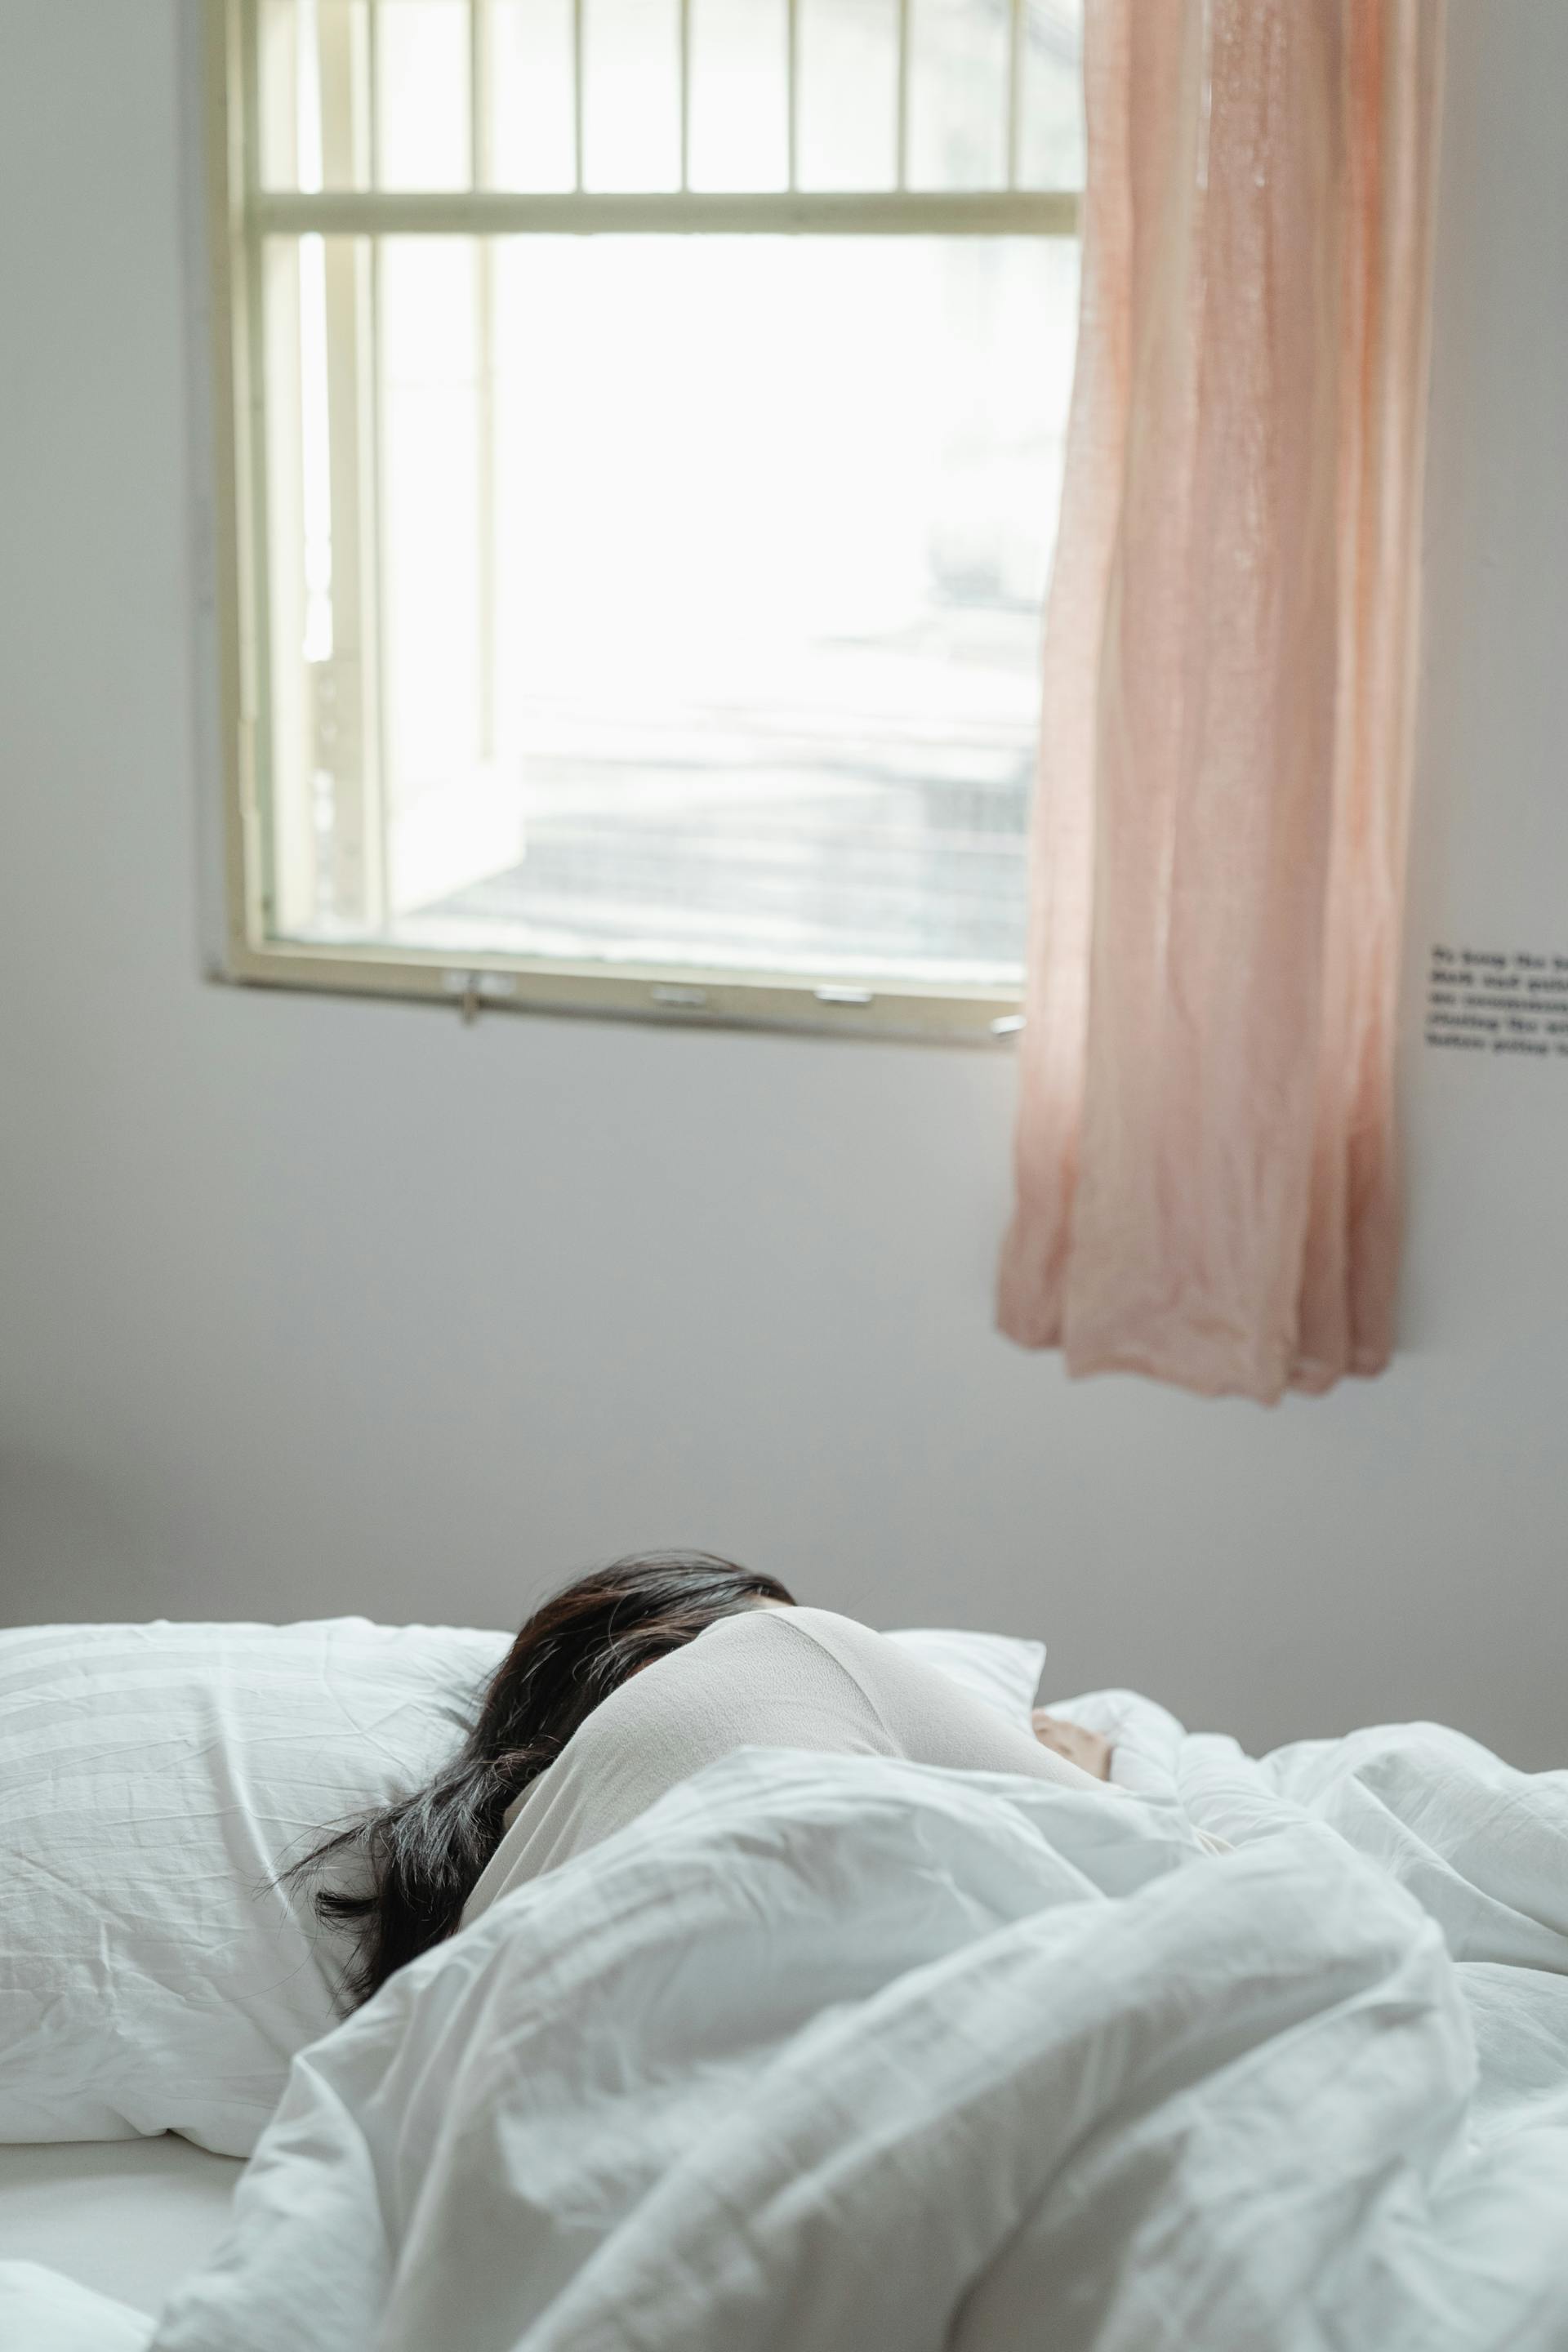 A person sleeping in bed | Source: Pexels